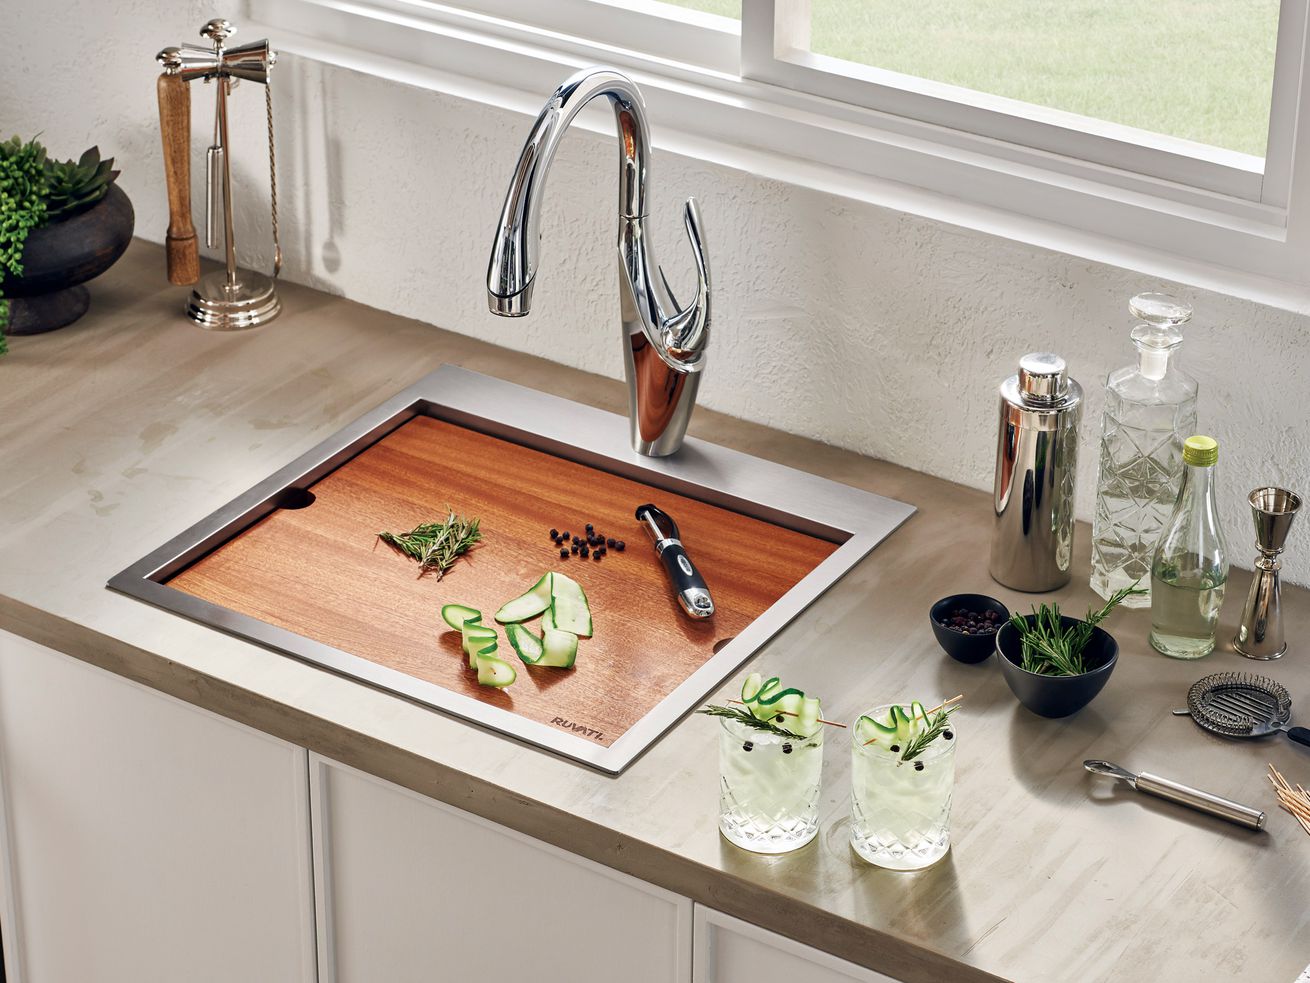 Sink with a built in cutting board